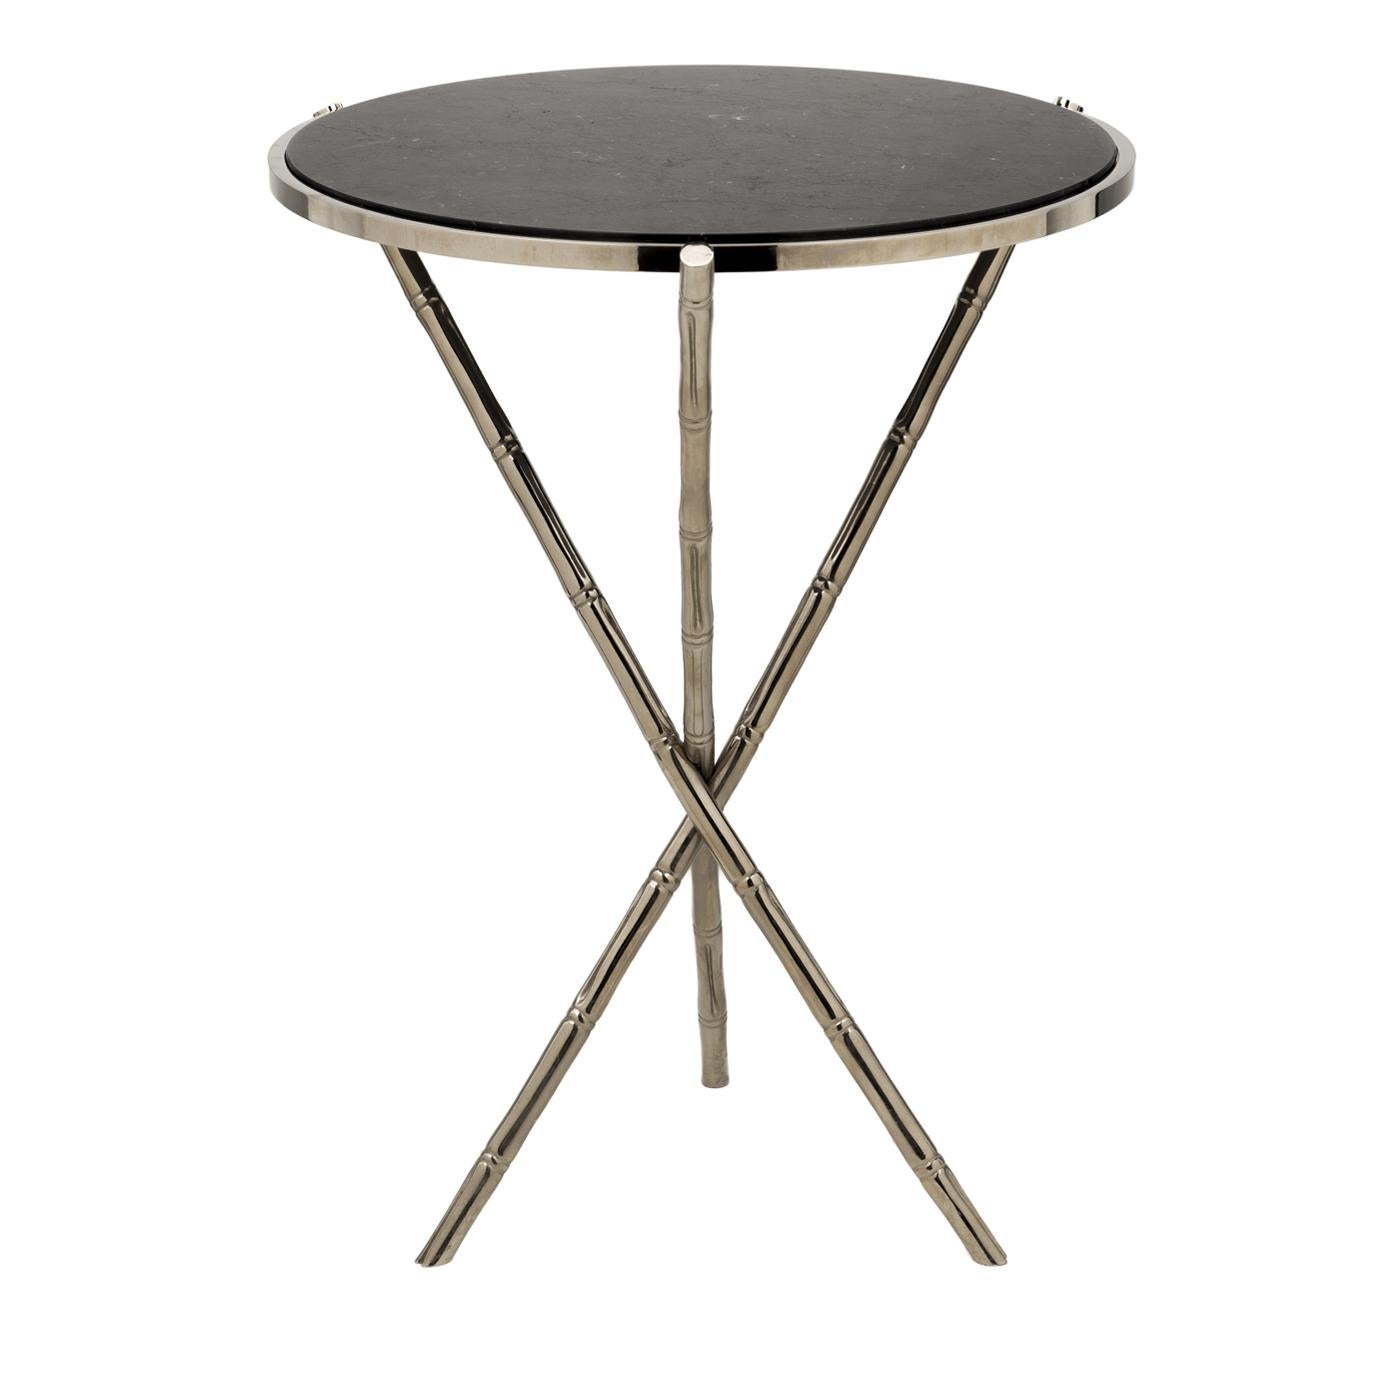 This table, with its simple lines and precious materials, will complement any decor. Its three crossing legs in brass are given a bamboo-like texture and their subtle finish elegantly complements the round top in marble. Either by the sofa in a